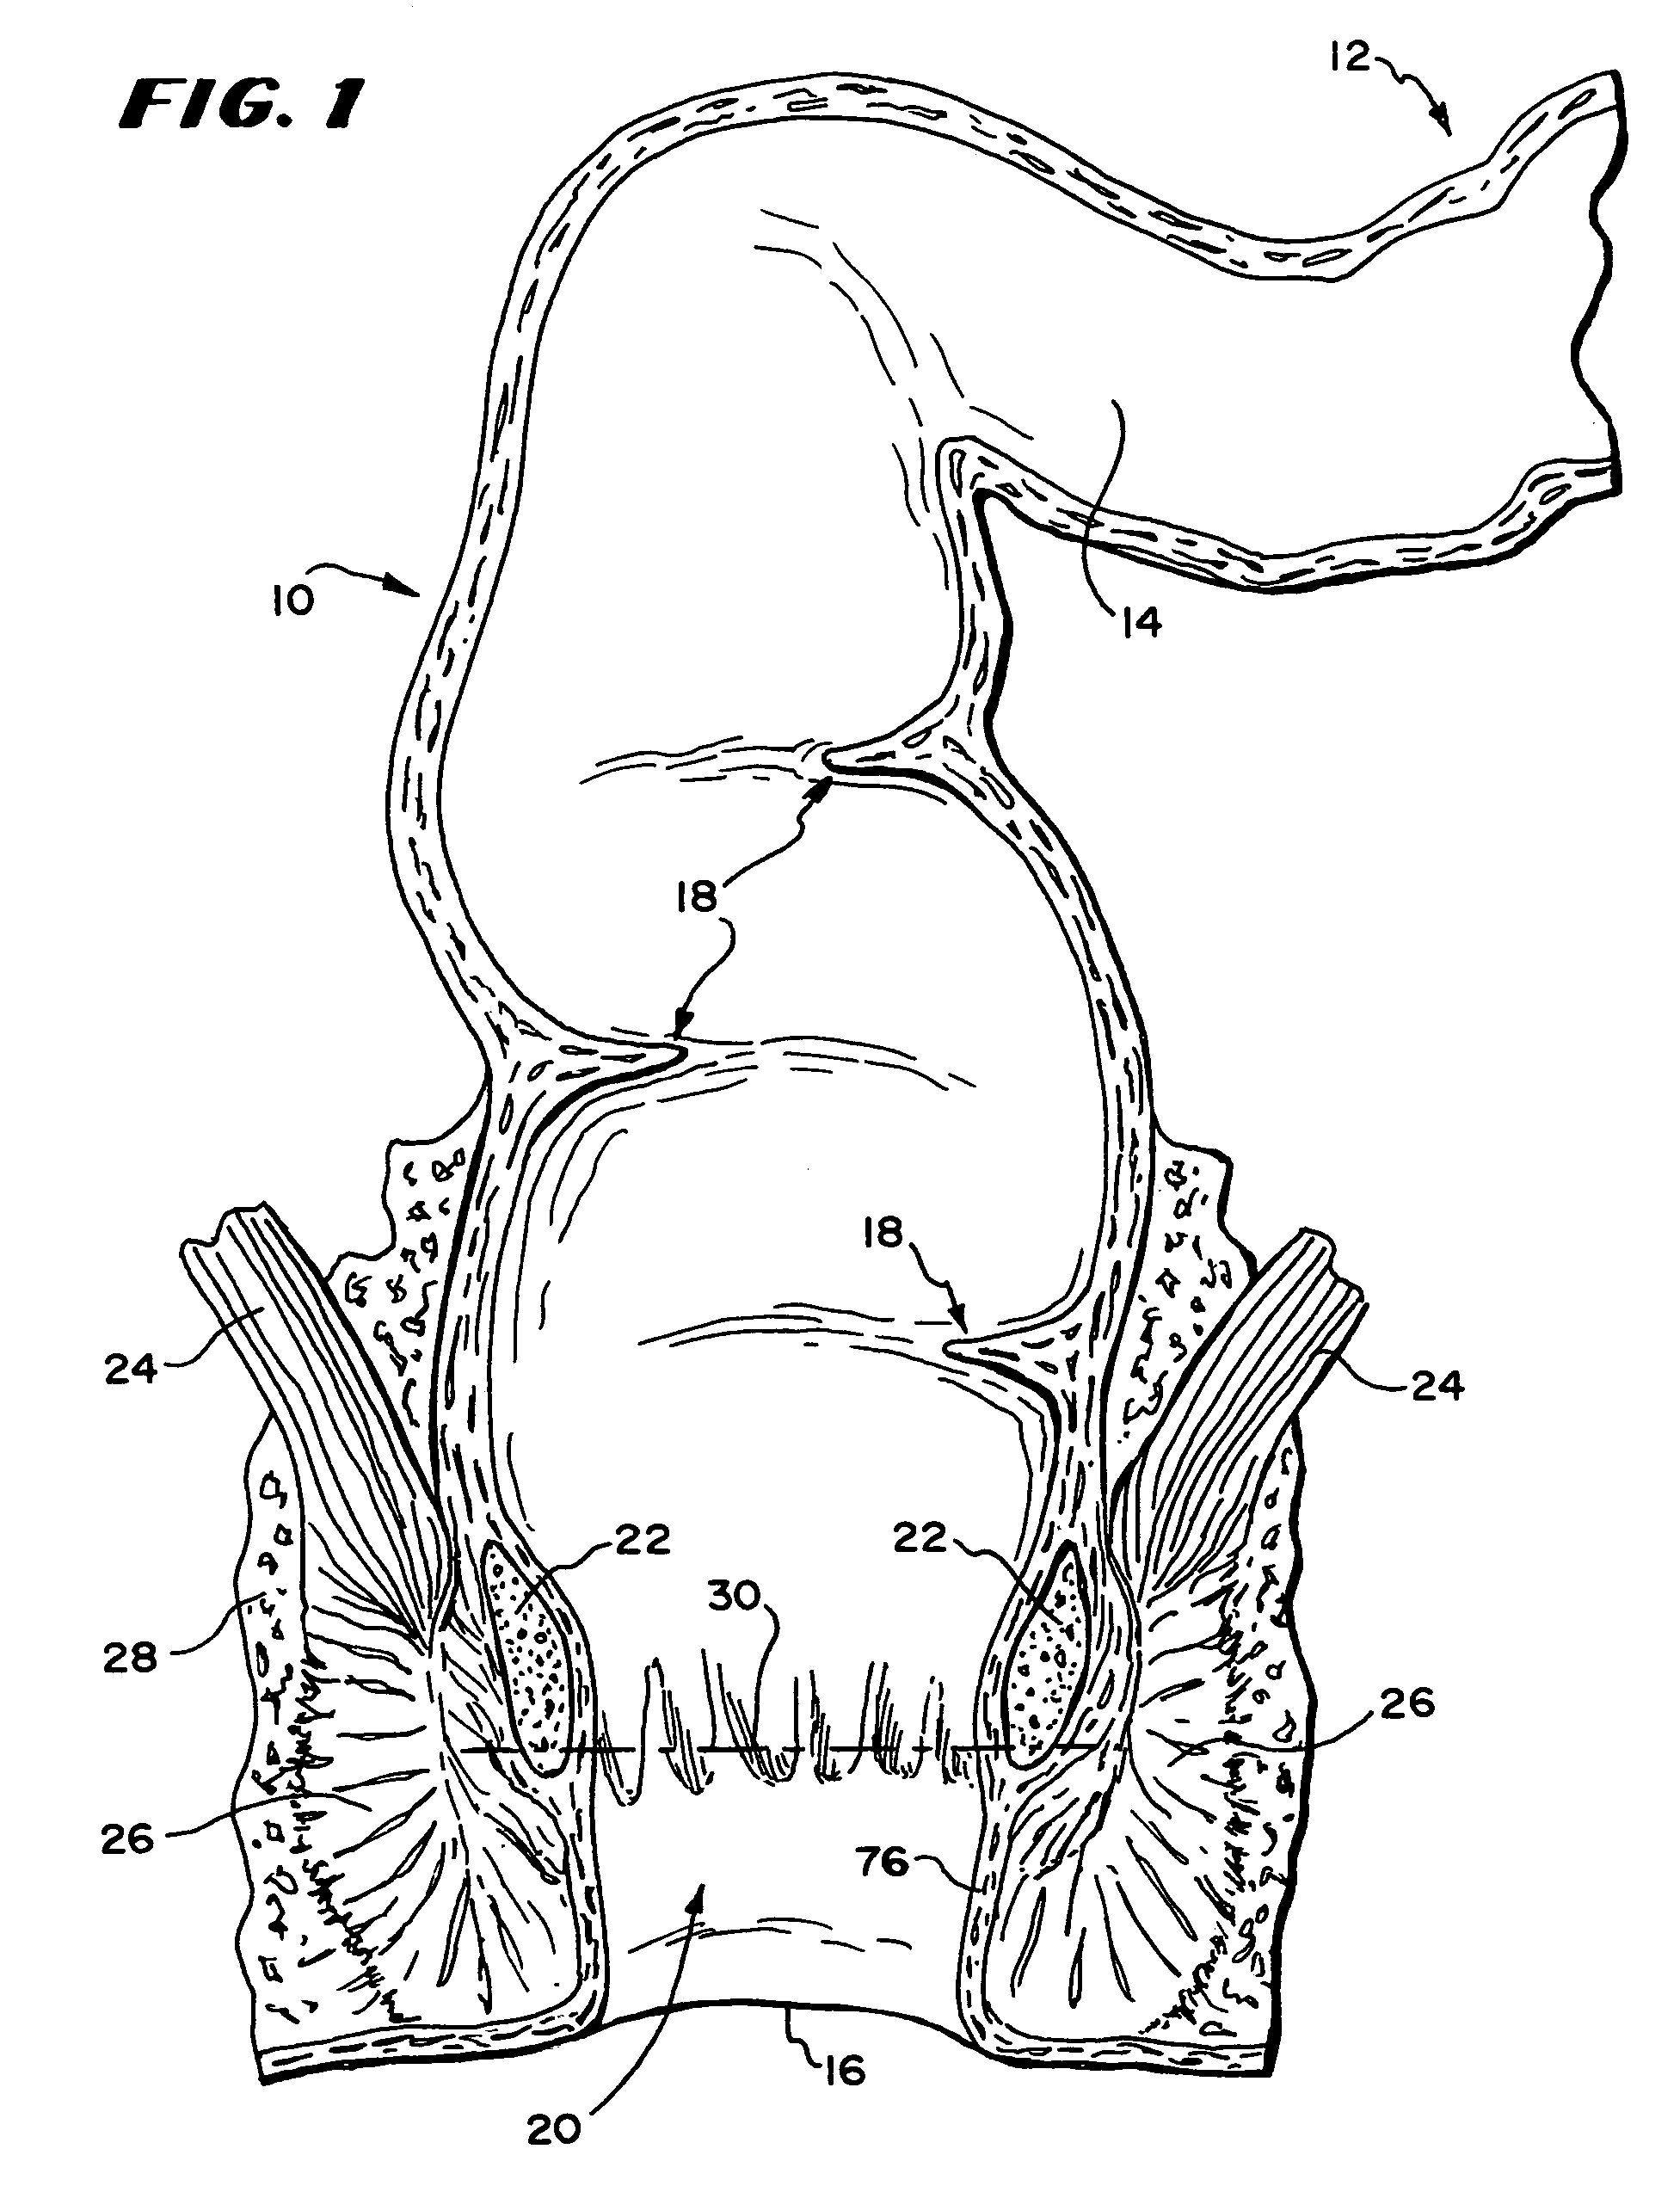 Systems and methods for treating dysfunctions in the intestines and rectum